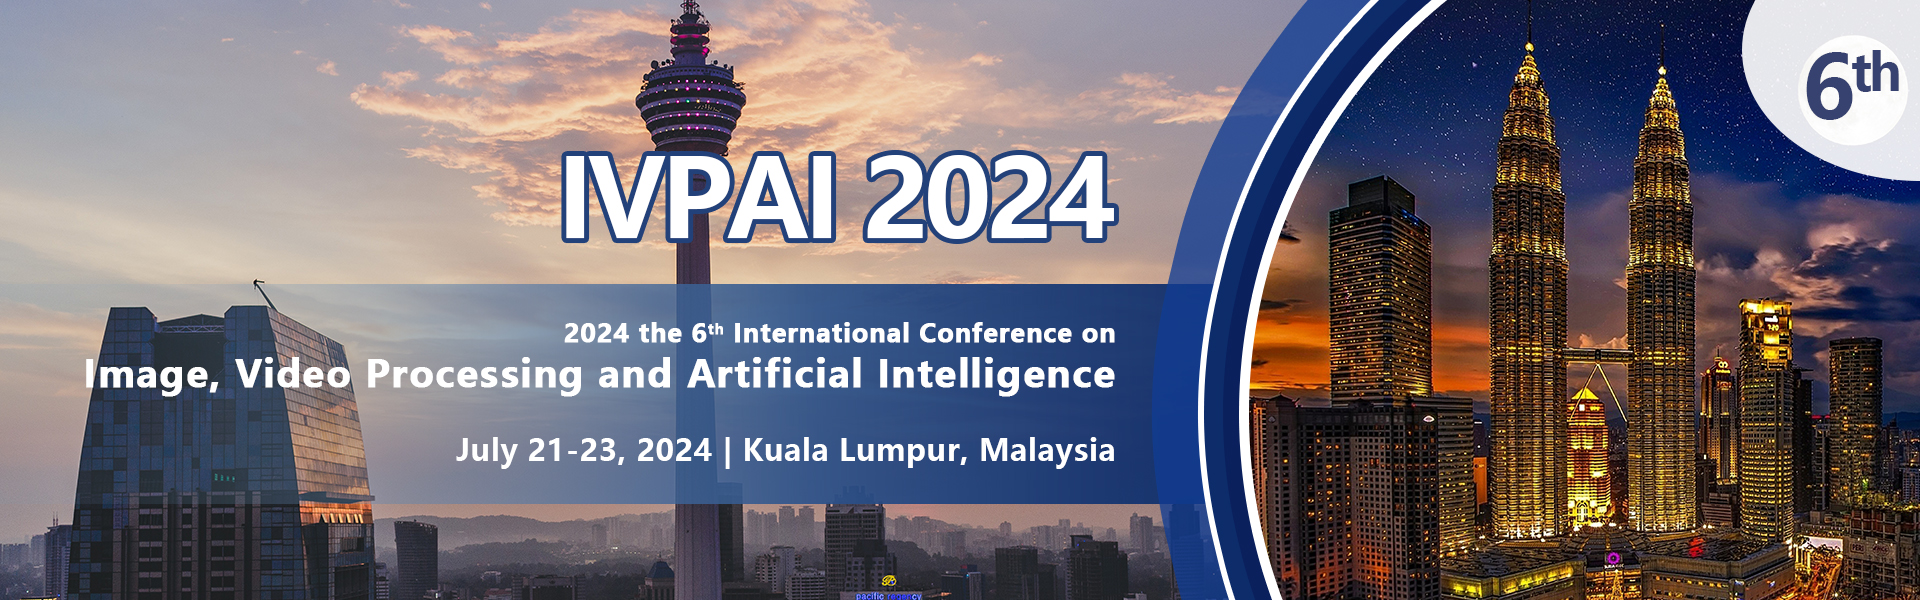 2024 the6th International Conference on Image, Video Processing and Artificial Intelligence